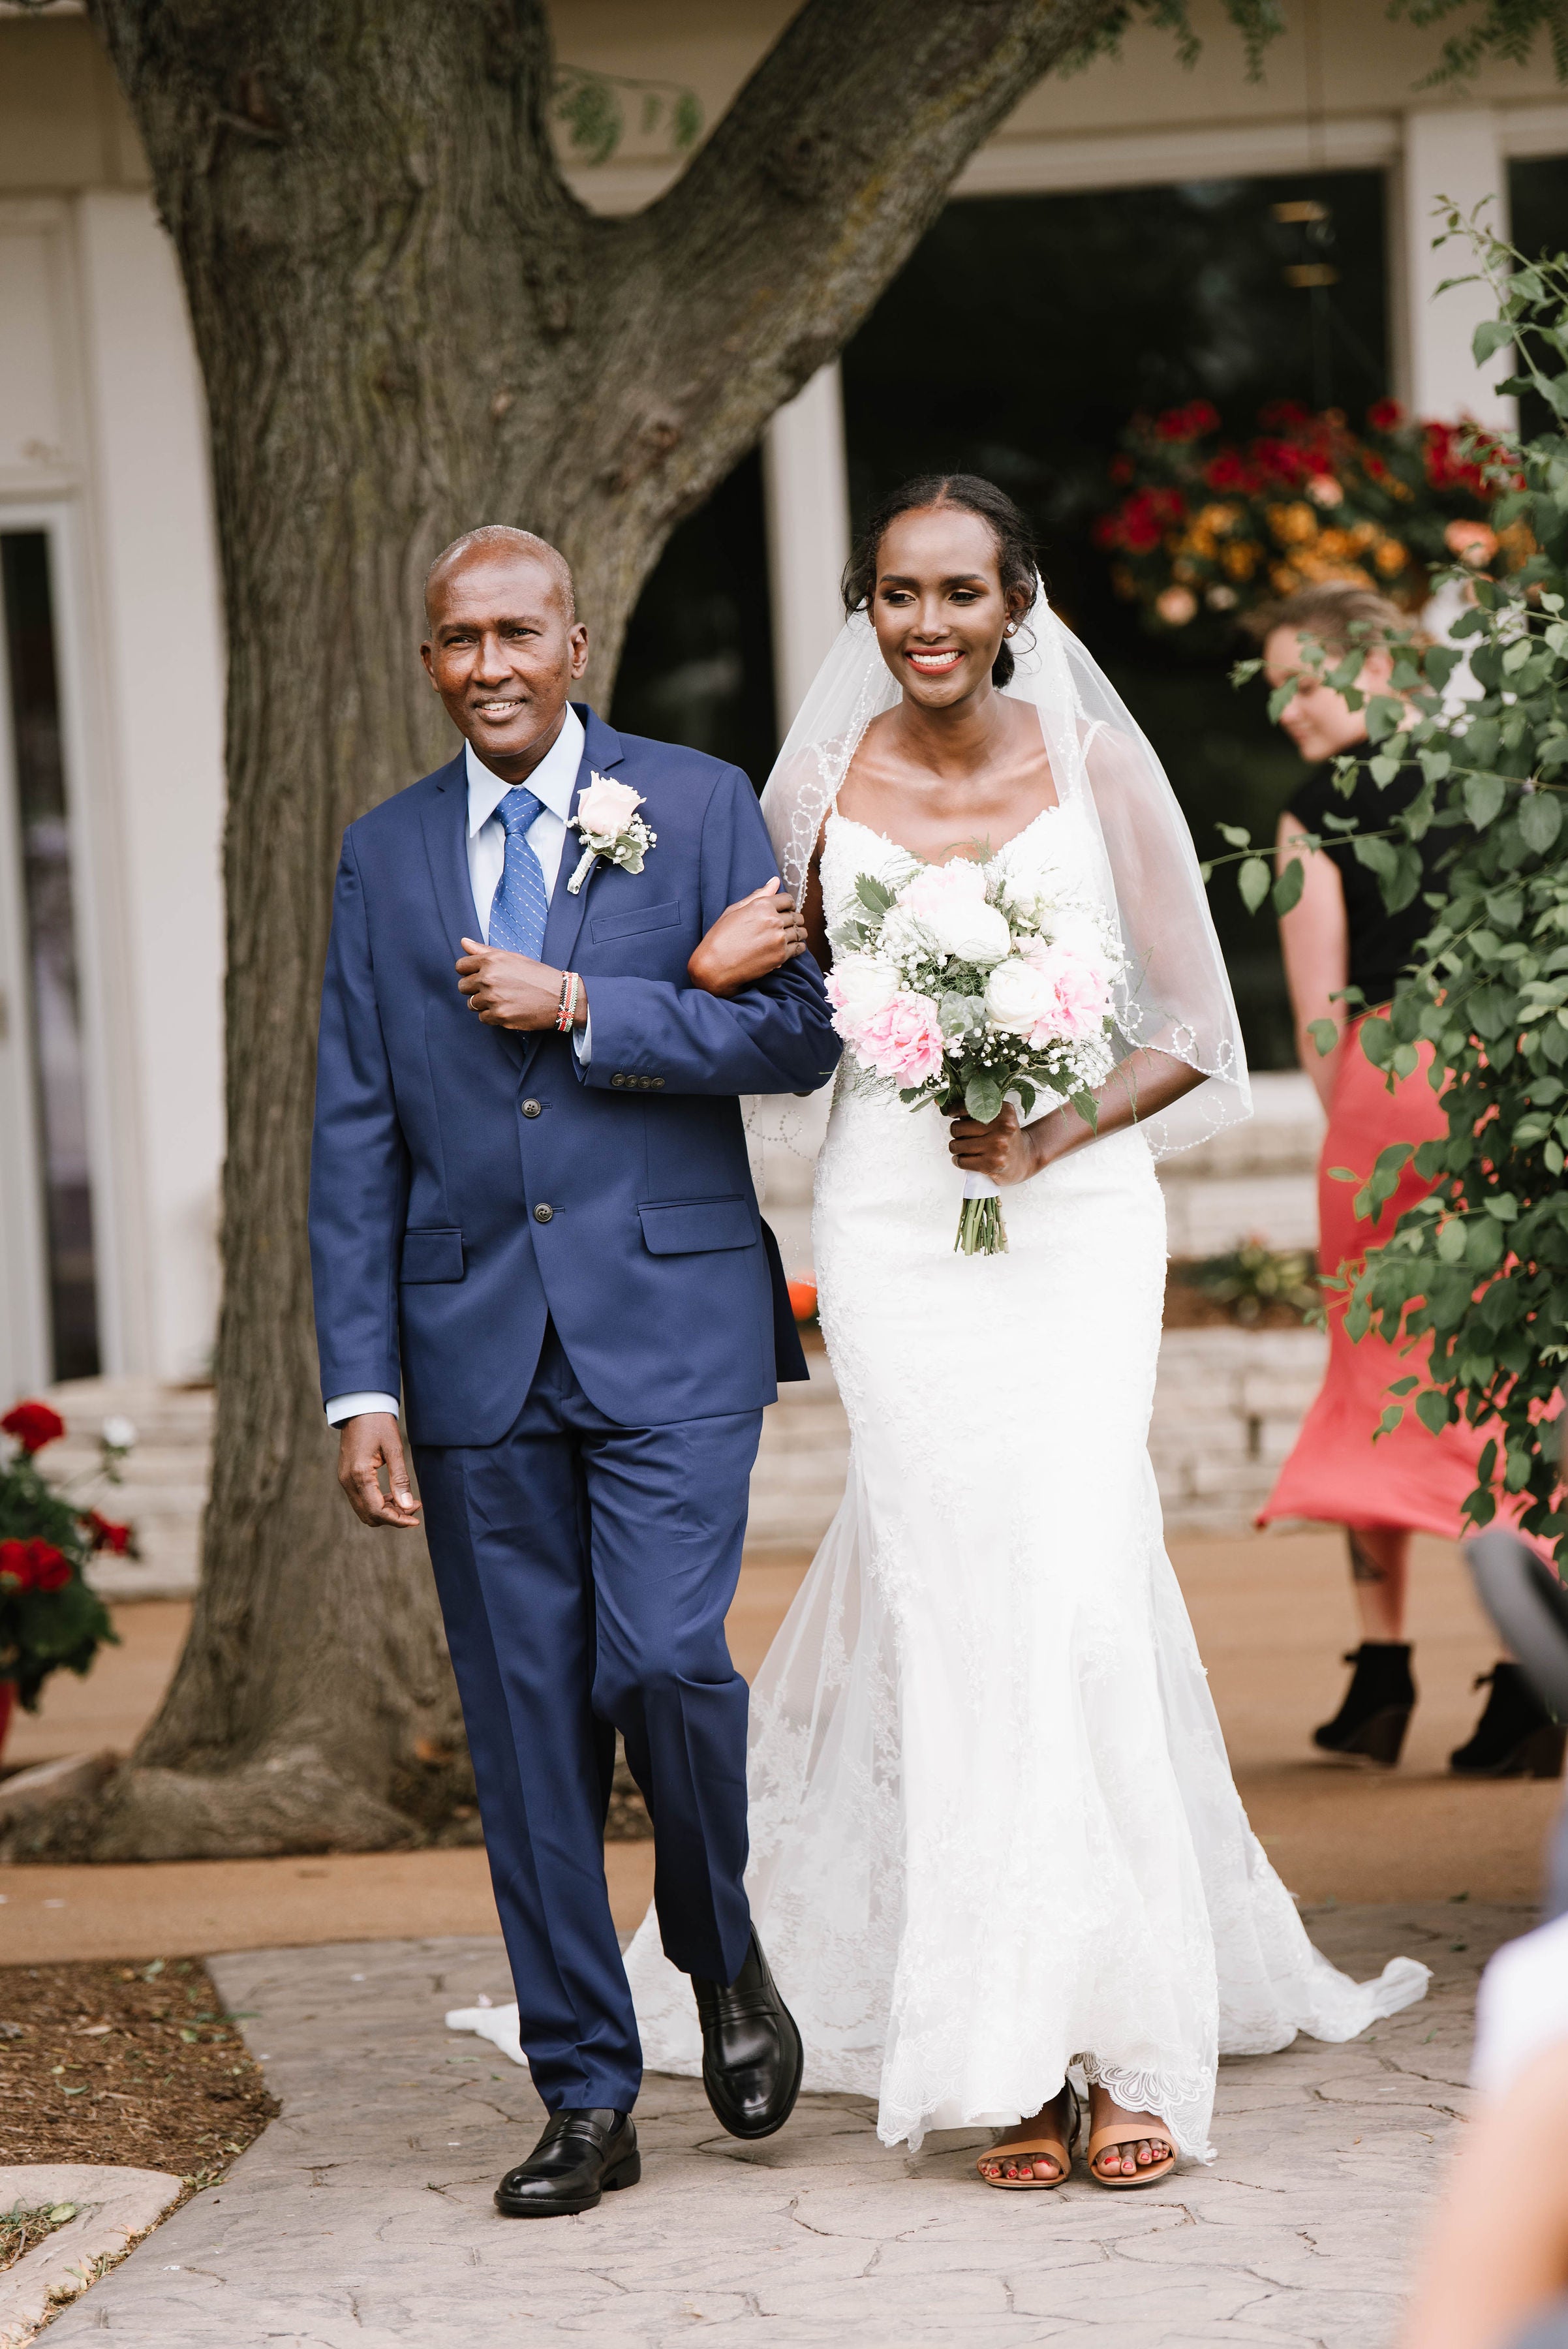 Bridal Bliss: Viviana And Benson’s Modern Wedding With A Cultural Twist